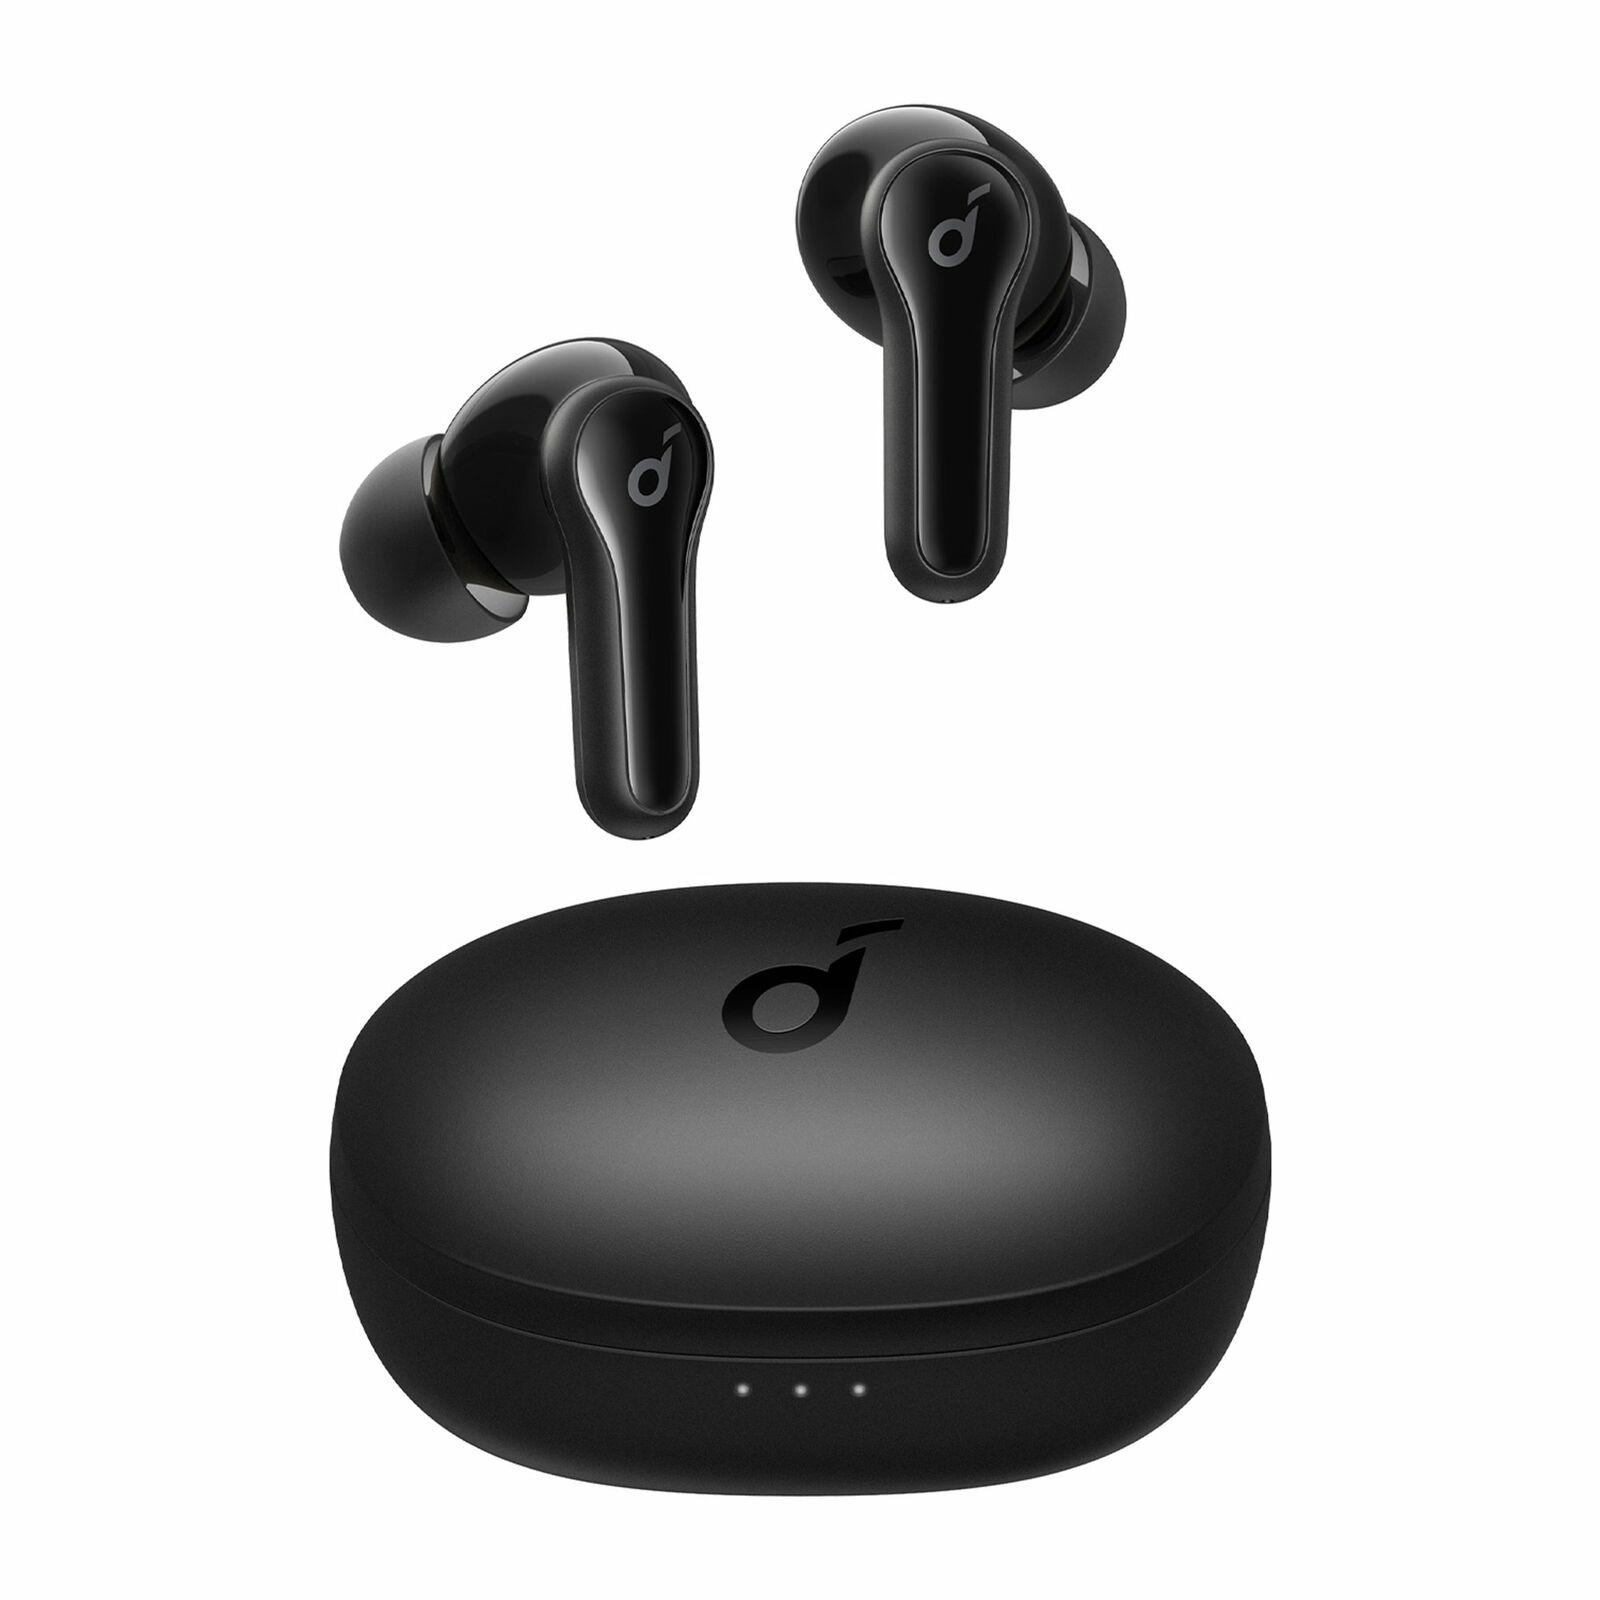 Soundcore Life Note C True Wireless Earbuds for $11.99 Shipped